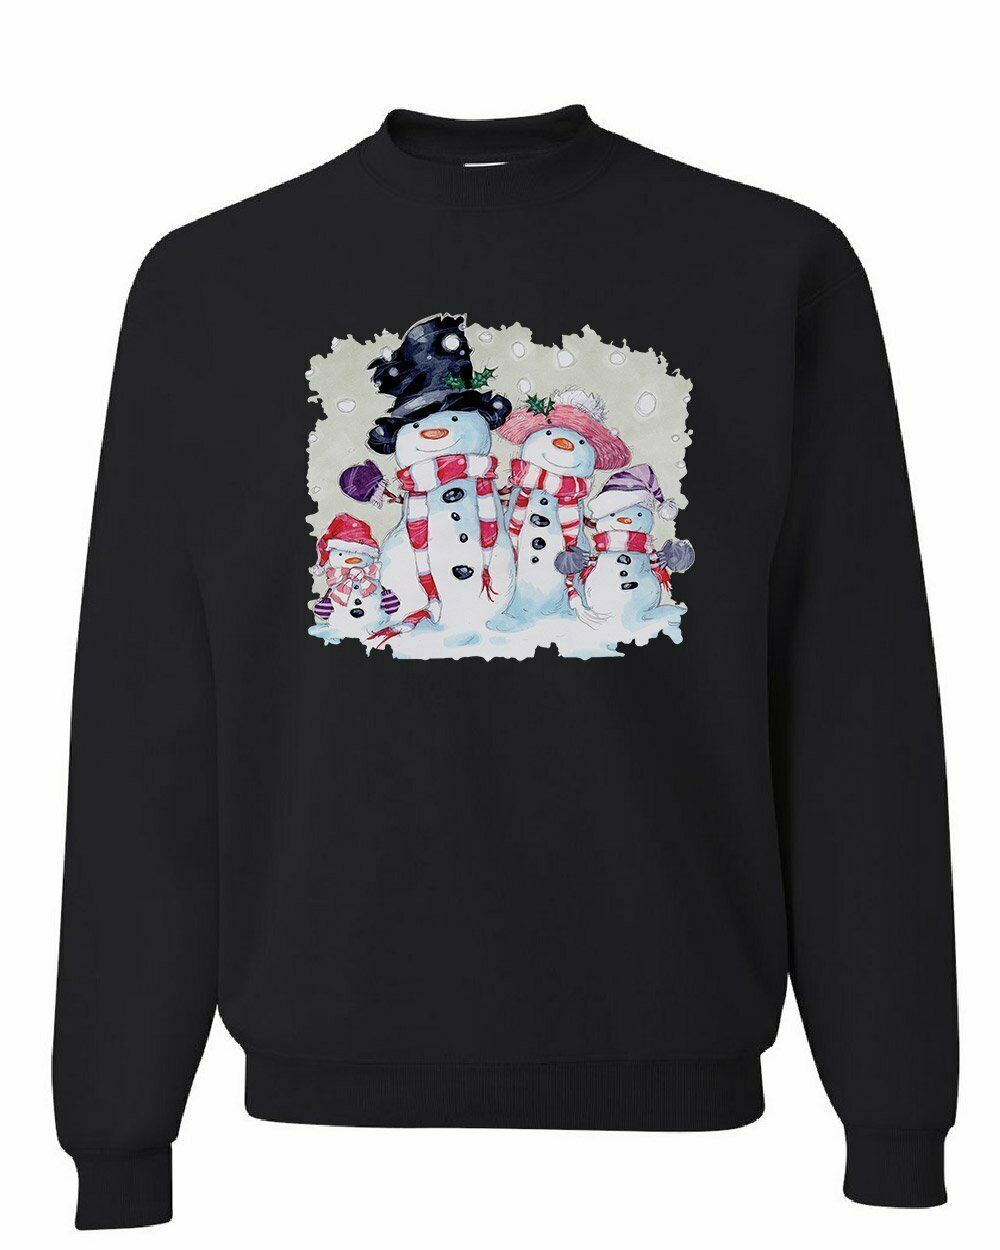 Merry Christmas Funny Snowman Family Style: Sweatshirt, Color: Black